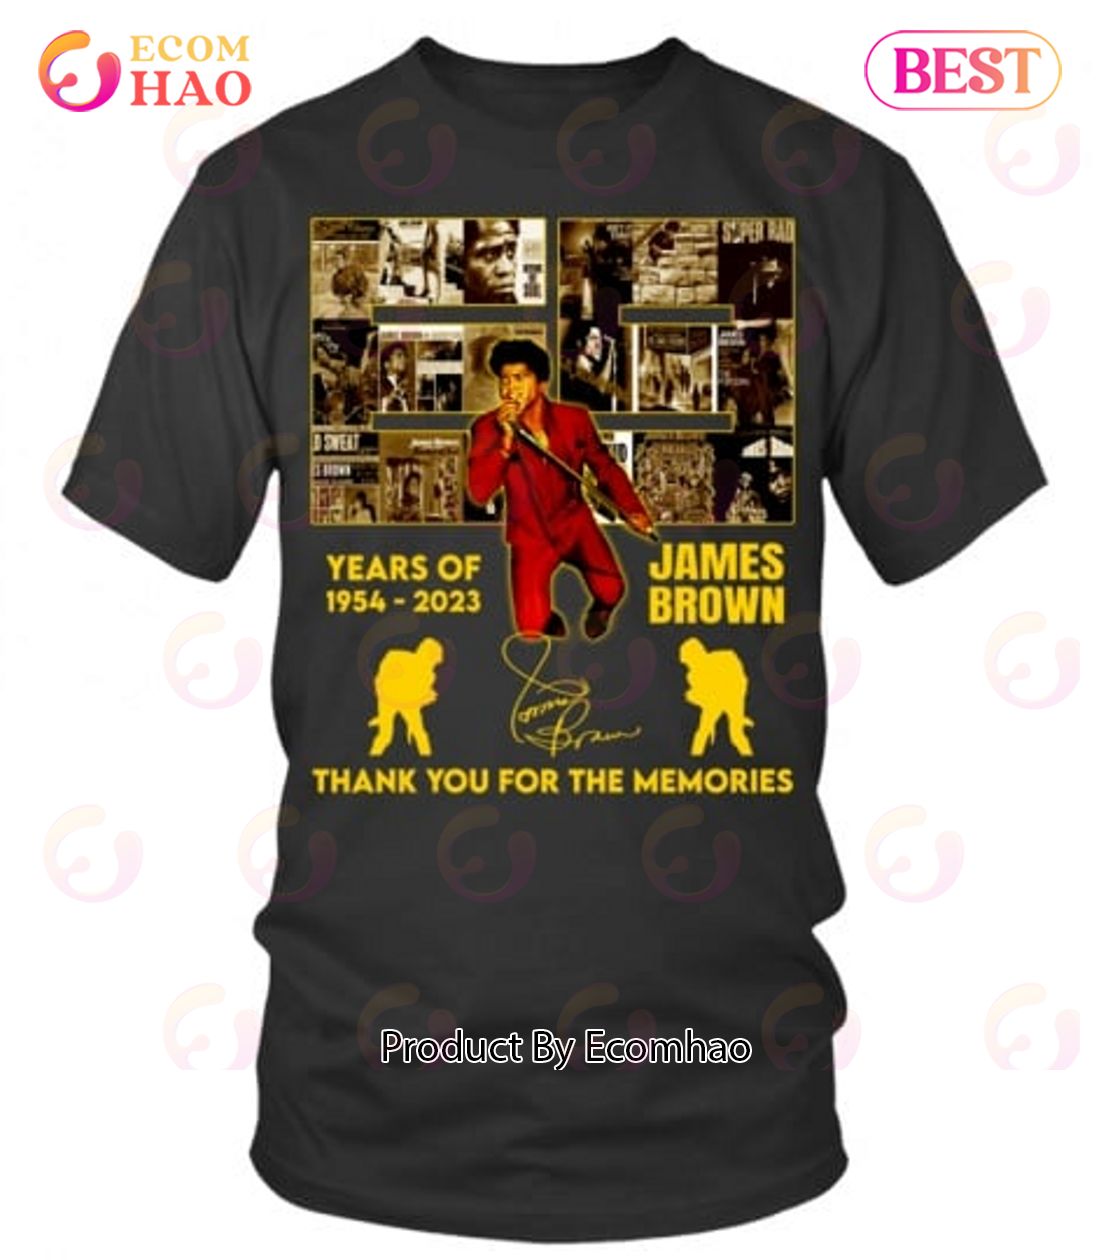 69 Years Of 1954 – 2023 James Brown Thank You For The Memories T-Shirt